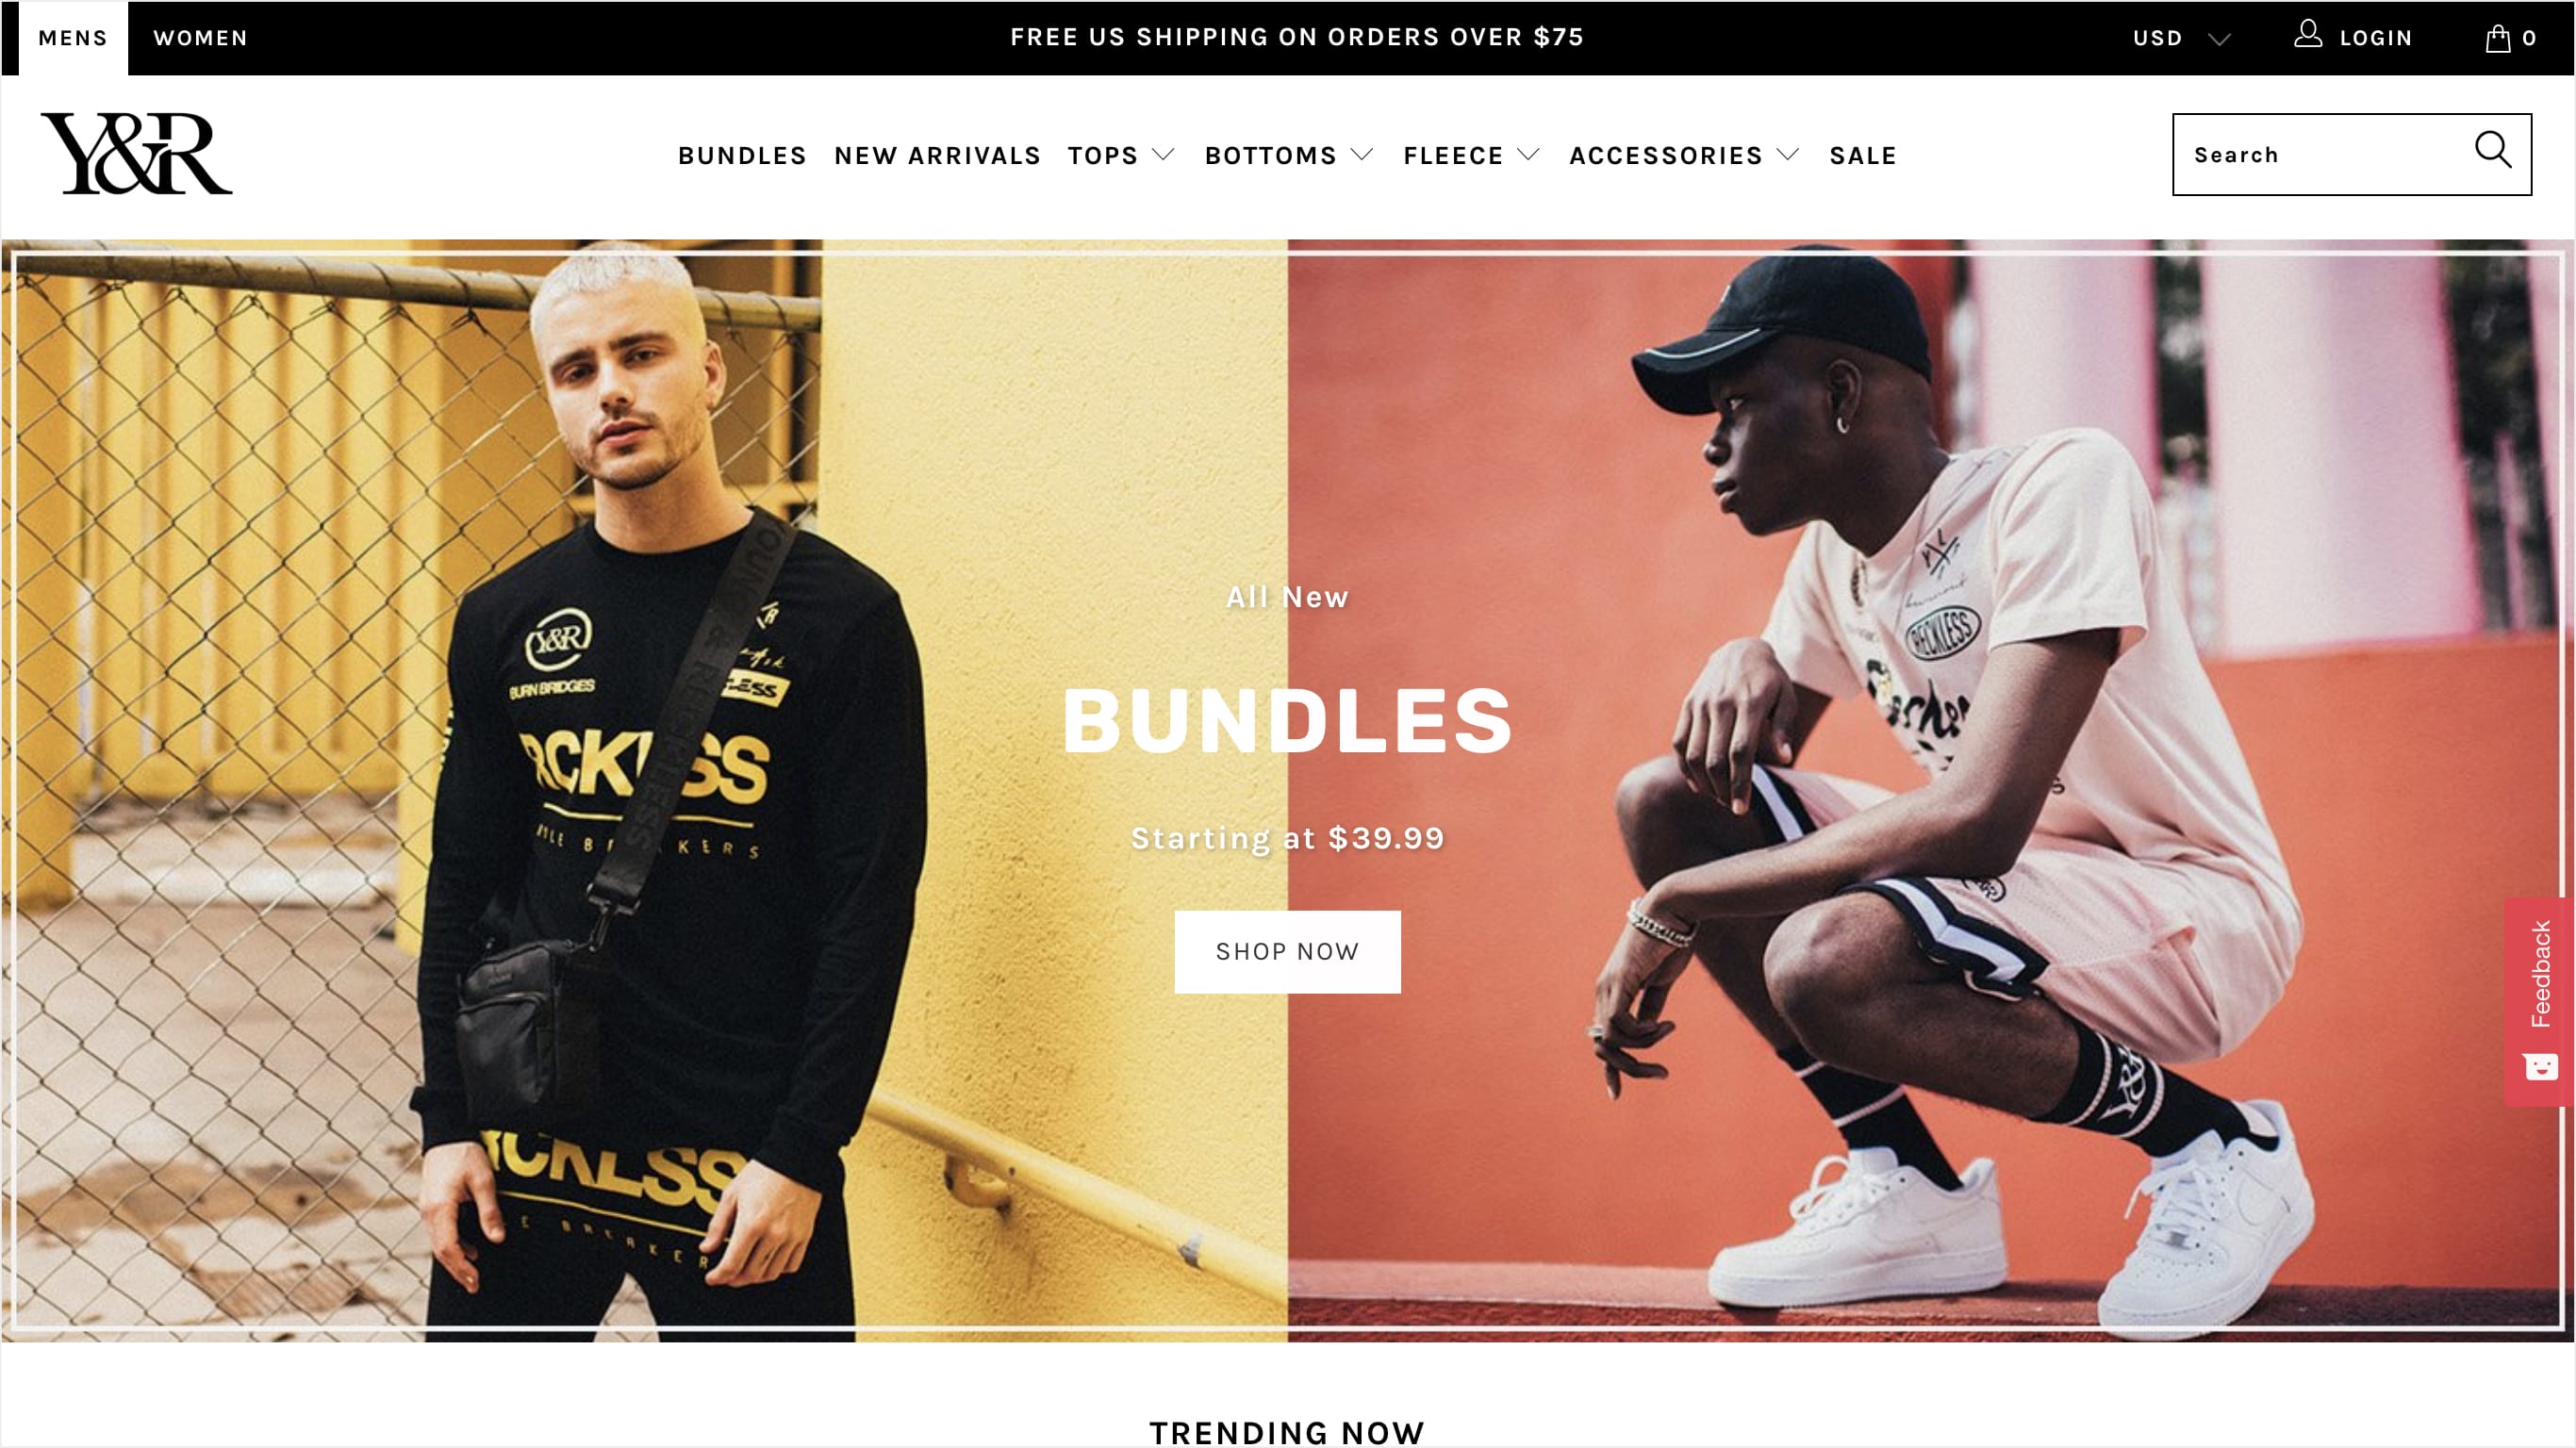 Young & Reckless Shopify Site